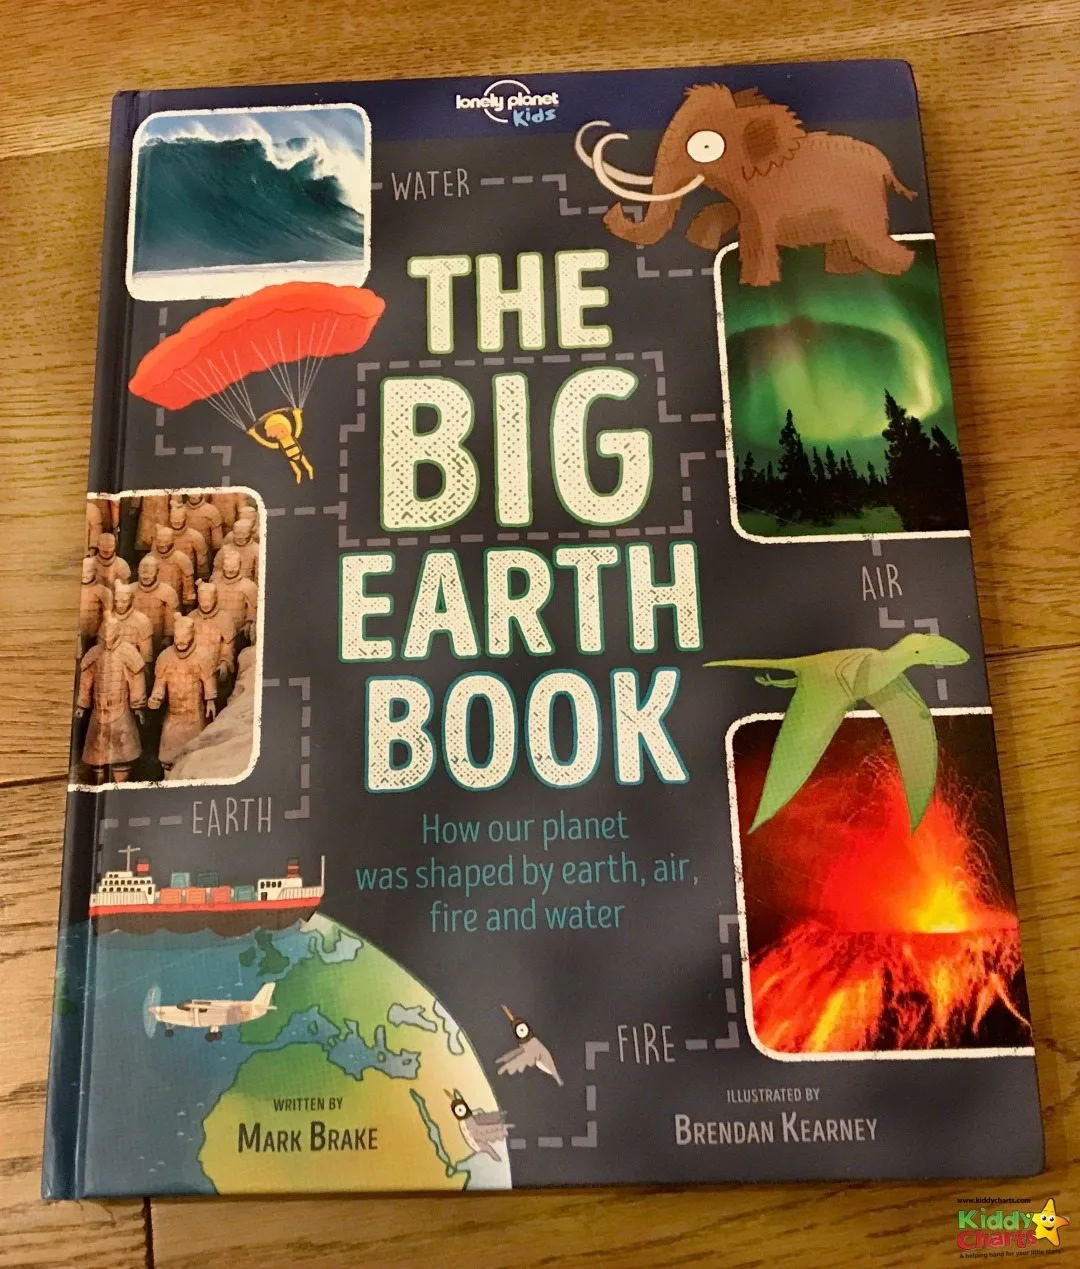 This is a great book for the kids - the Big Earth Book - explore all the elements in a fun and informative way. Thanks Lonely Planet Kids.